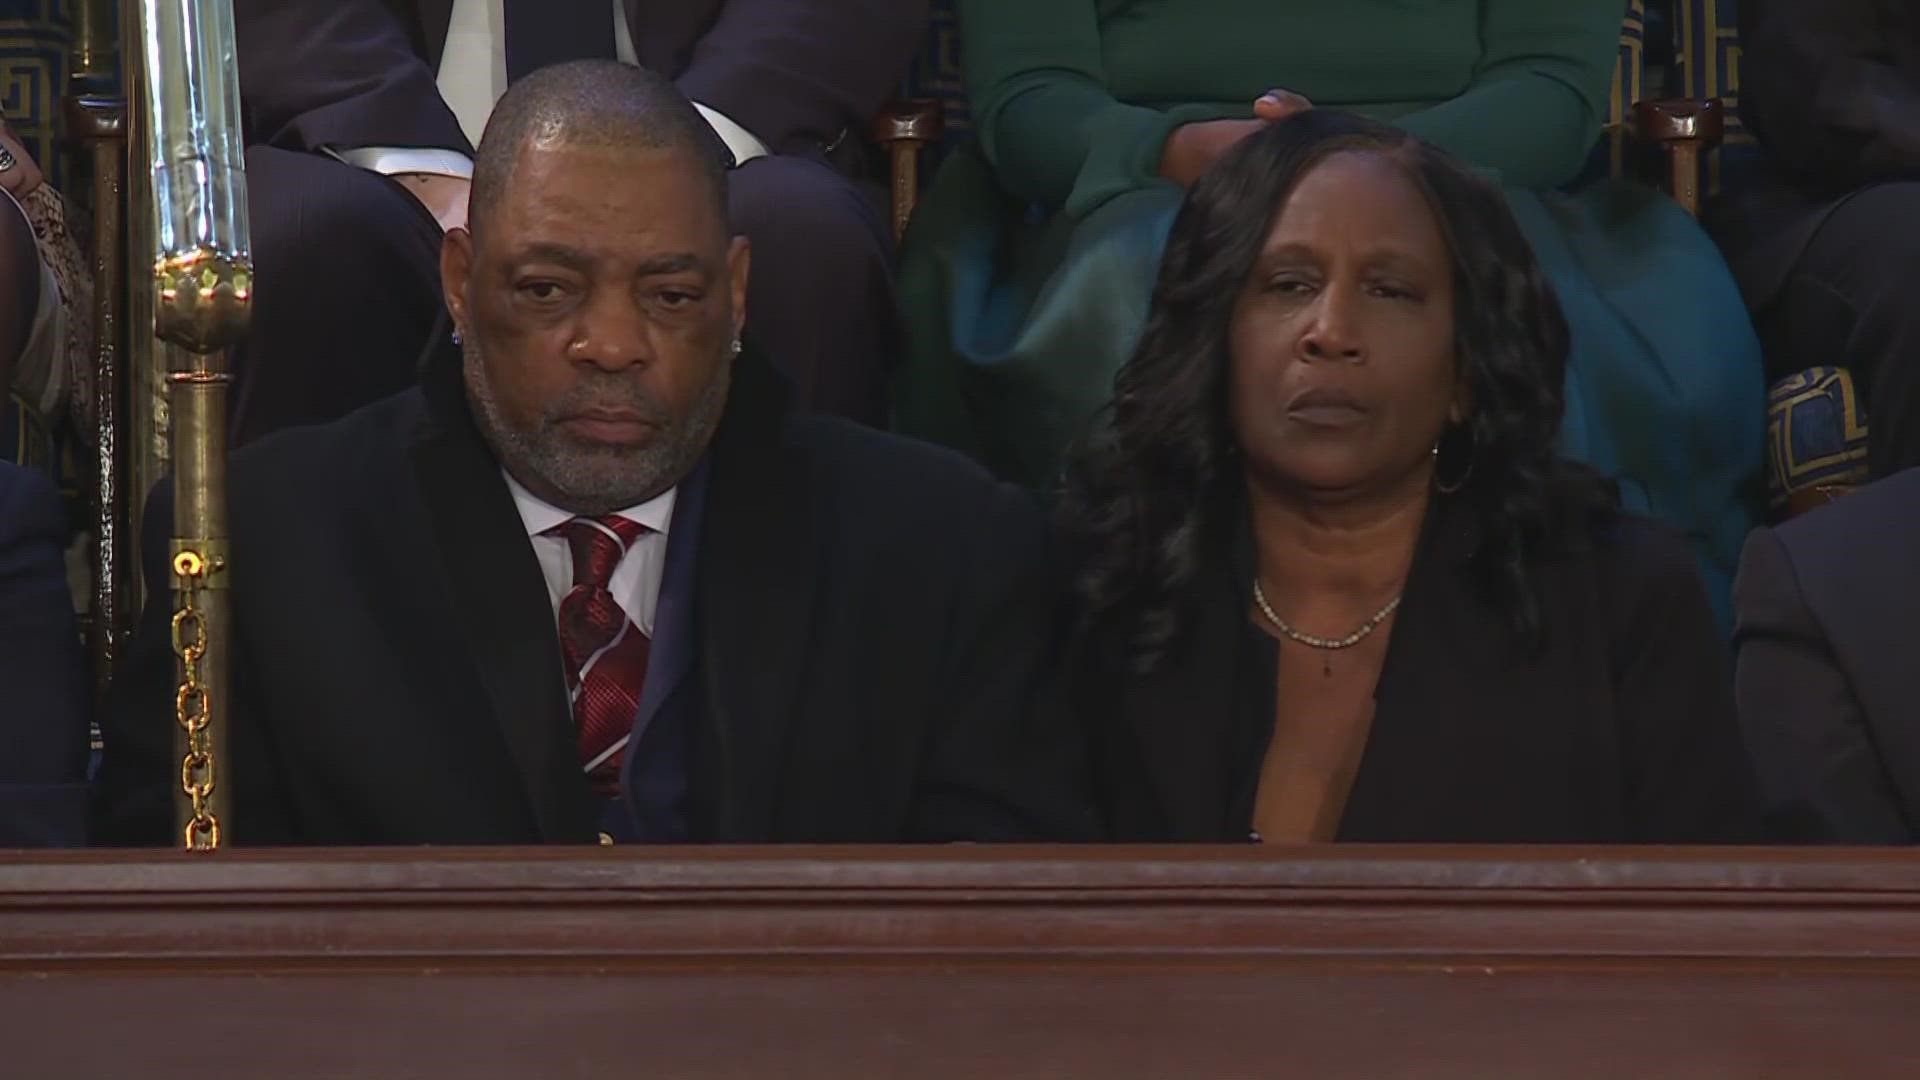 The family of Tyre Nichols, who was severely beaten by Memphis police and later died, was in the audience for the State of the Union.